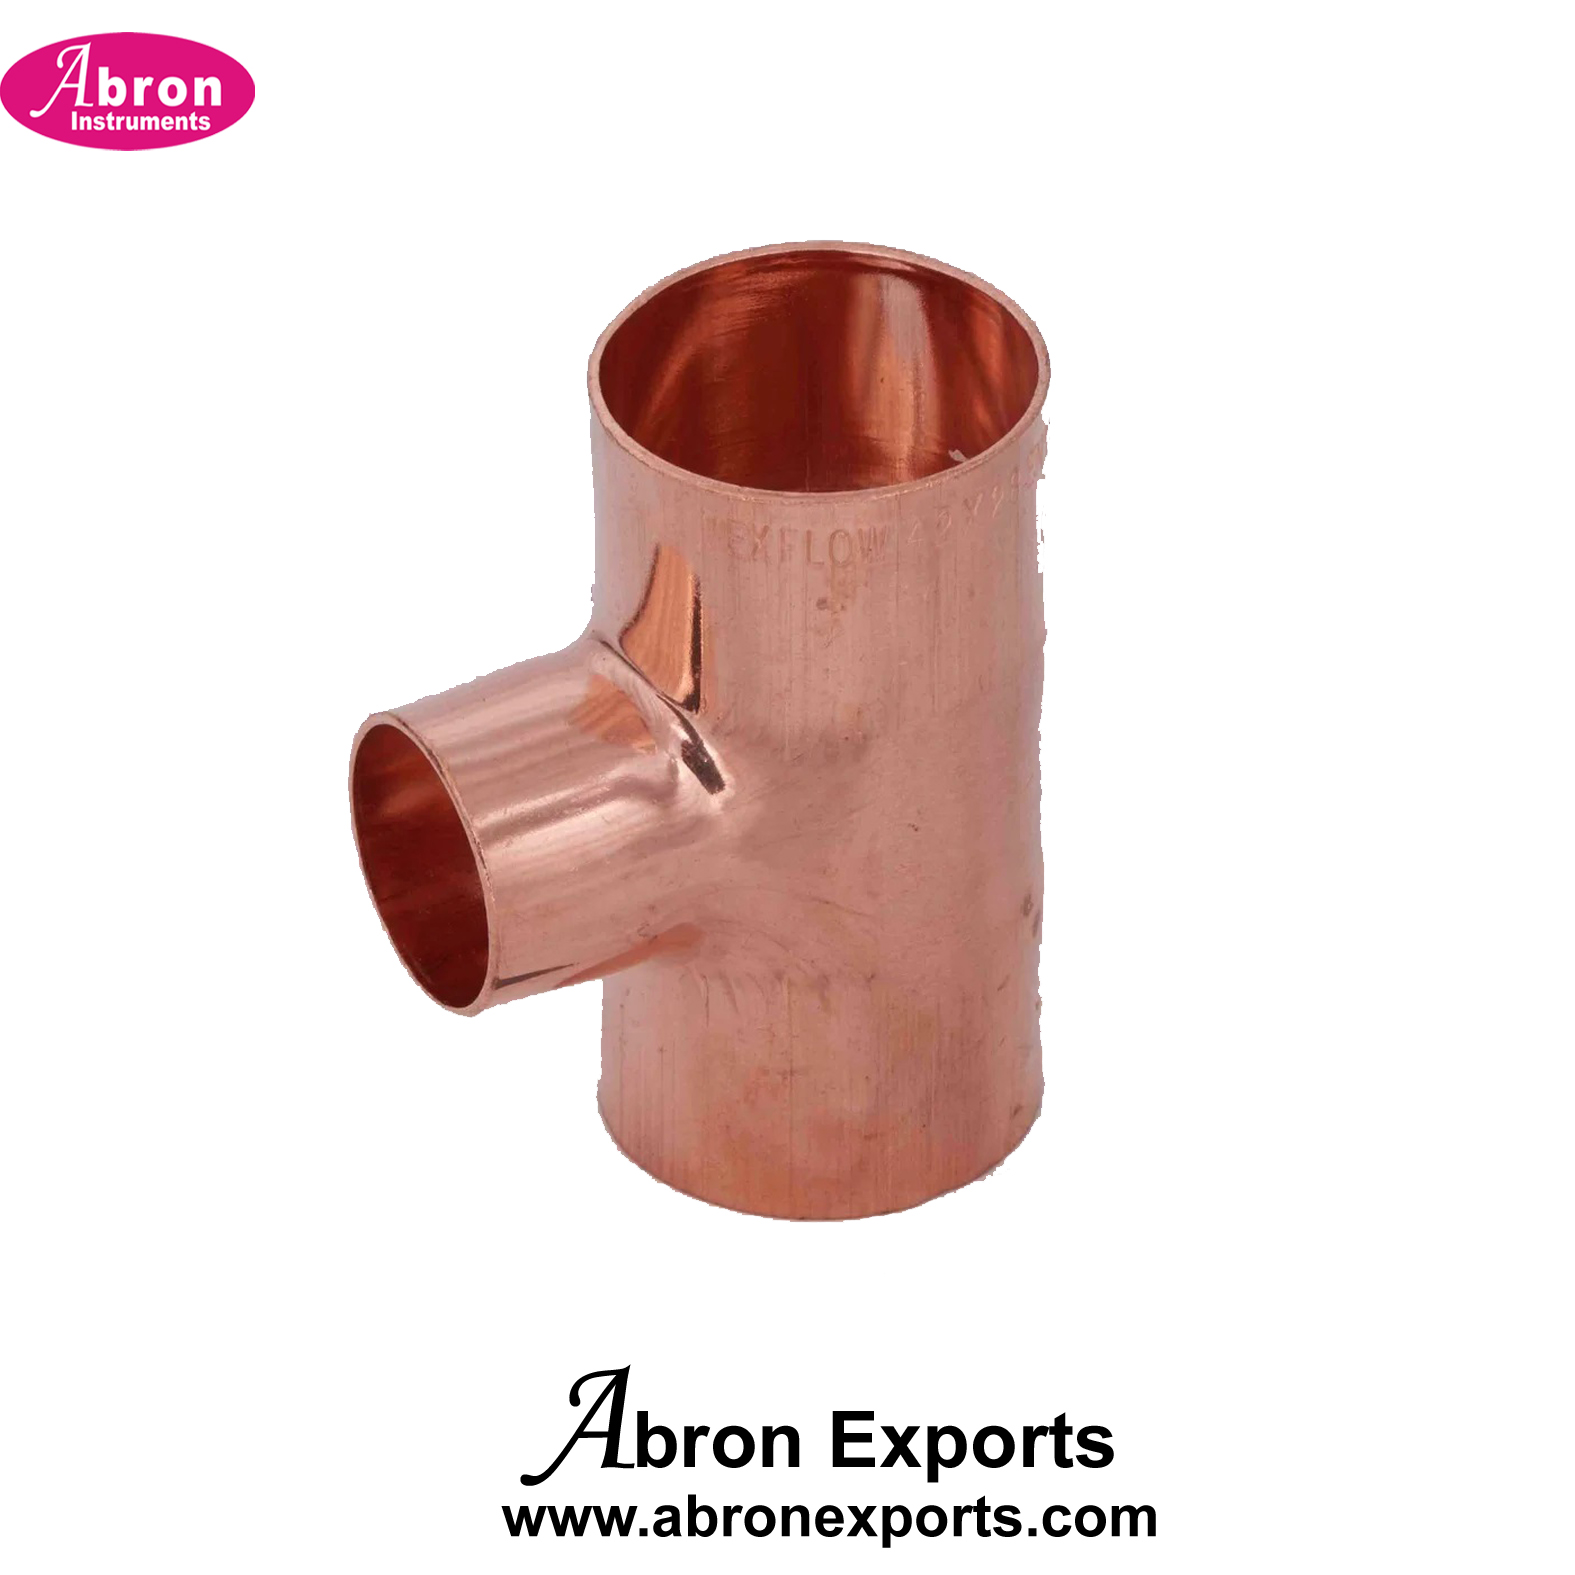 Medical gas Pipe Line spare copper Tee coupler 15mm or 22mm Pack of 100 each gas for pipeline installation Abron ABM-1121PT22 